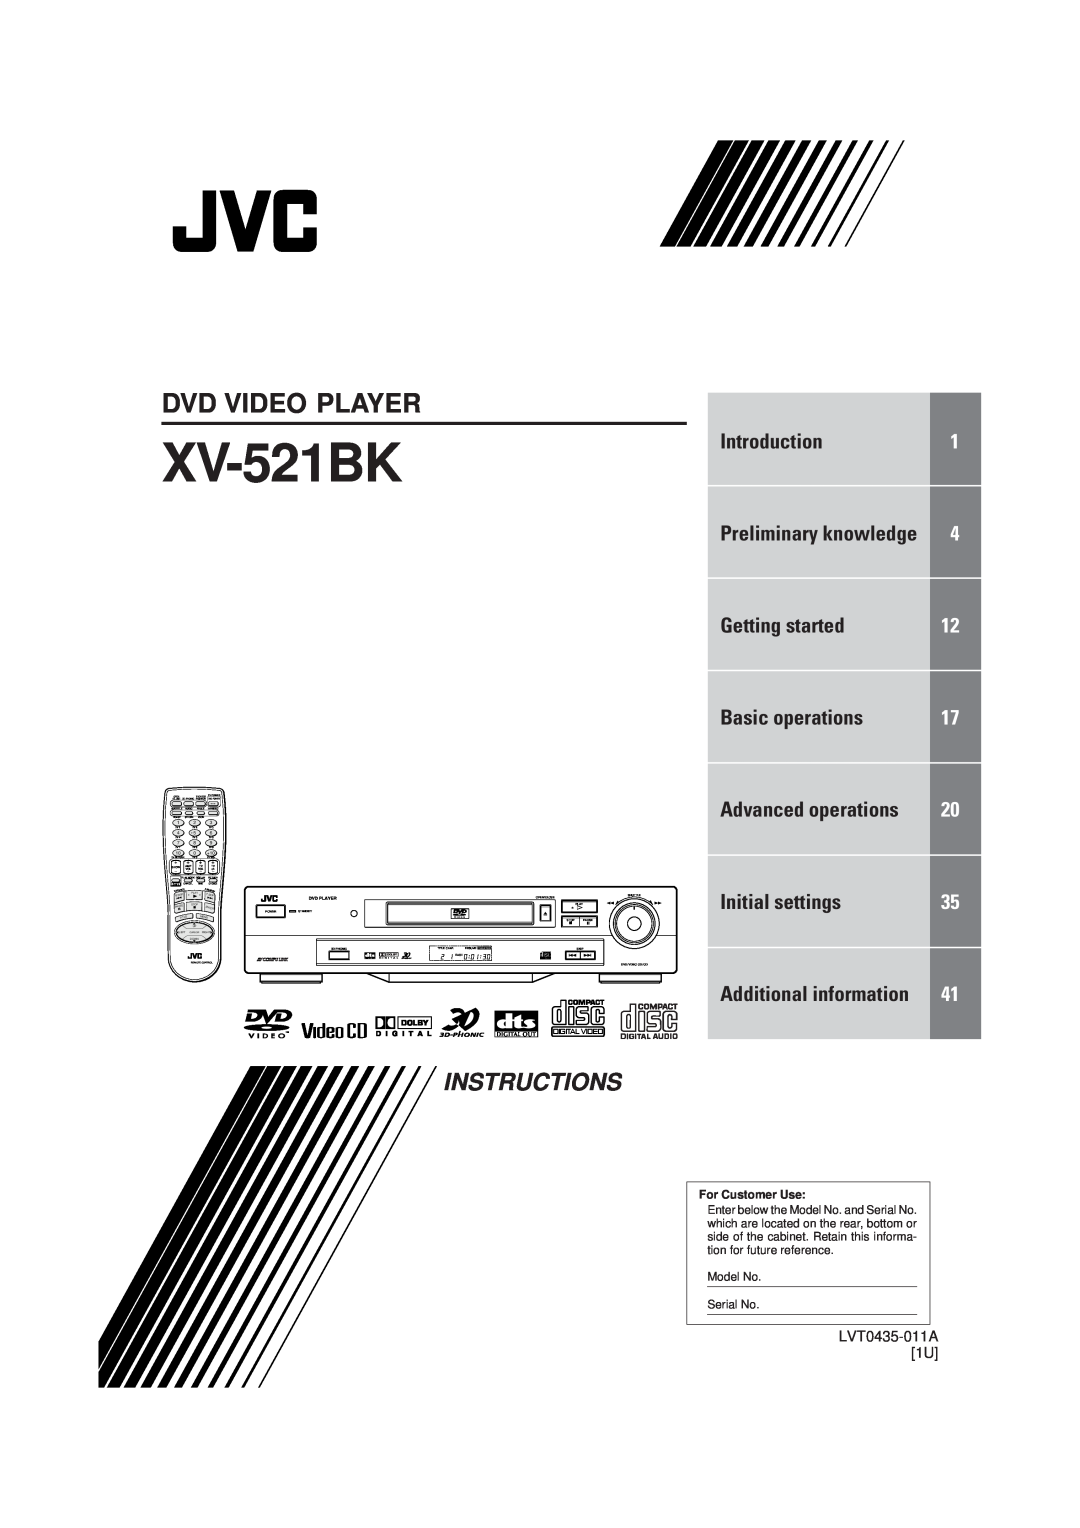 JVC XV-521BK manual Dvd Video Player, Instructions, Introduction, Getting started, Basic operations, Initial settings 